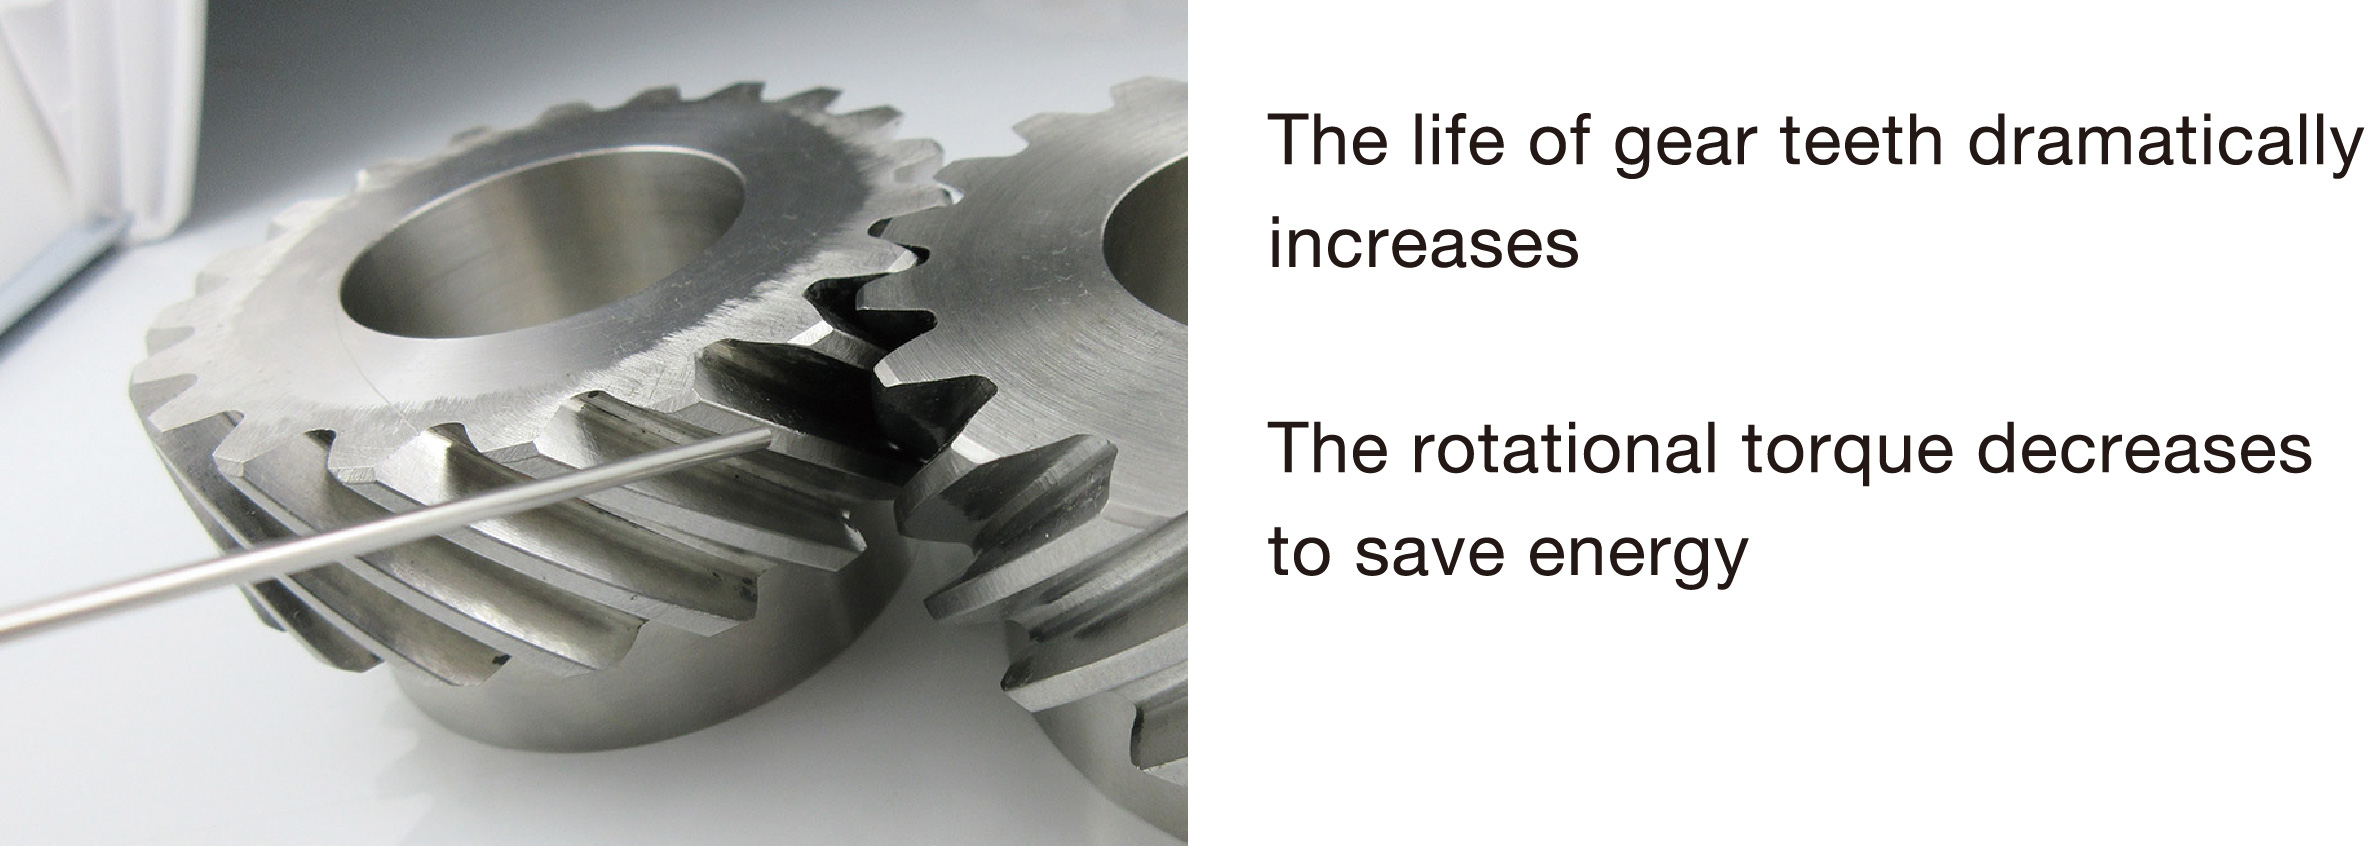 The life of gear teeth dramatically increases. The rotational torque decreases to save energy.